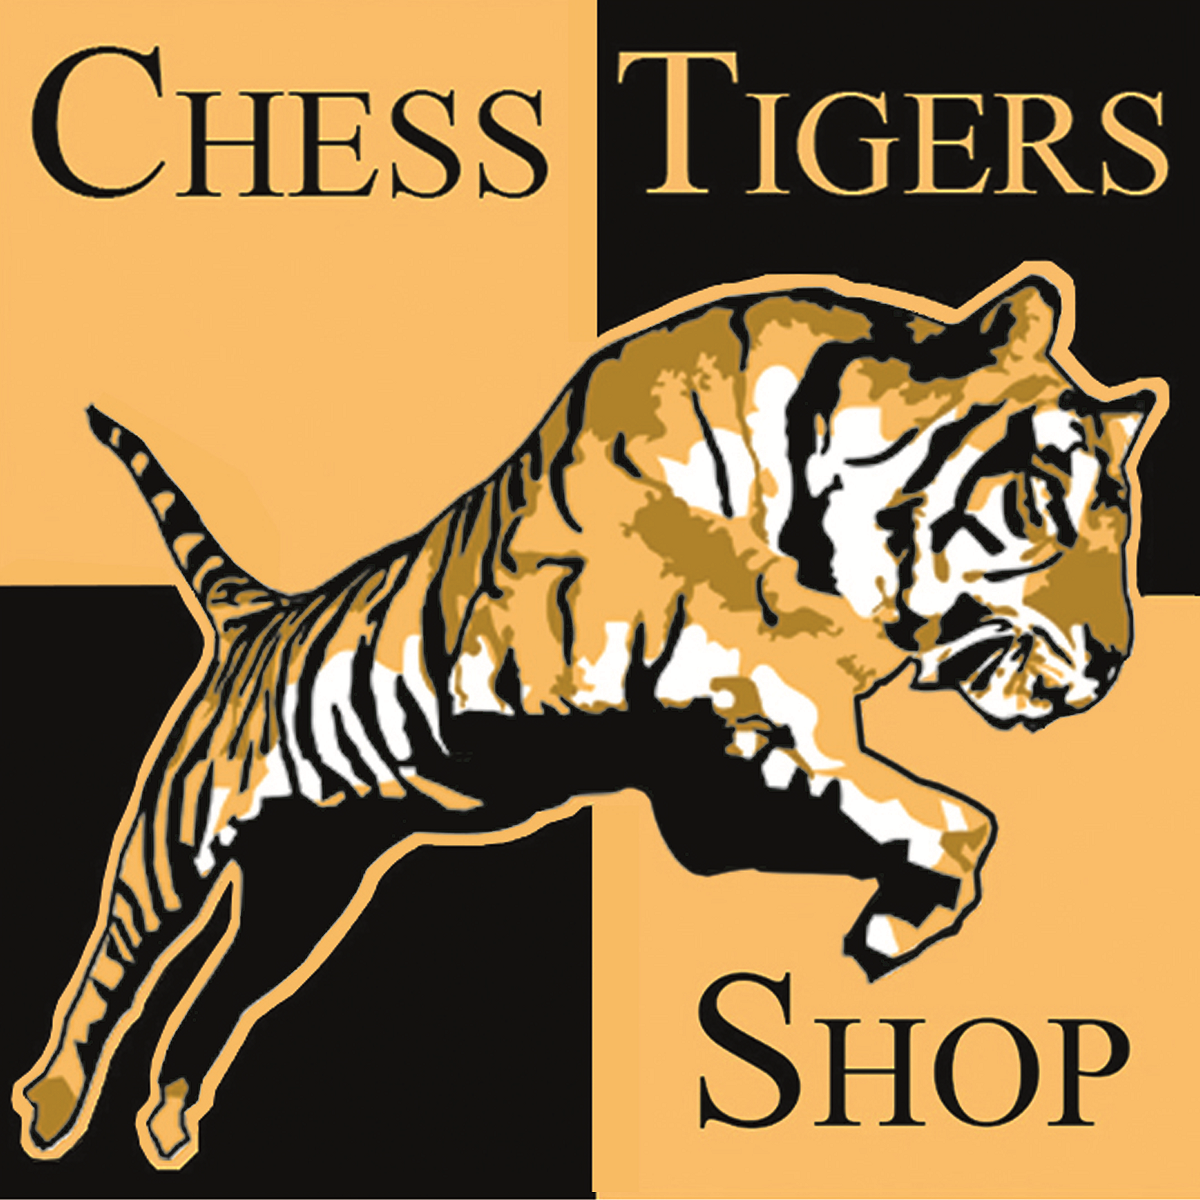 Various Chess Tigers Shop gift vouchers